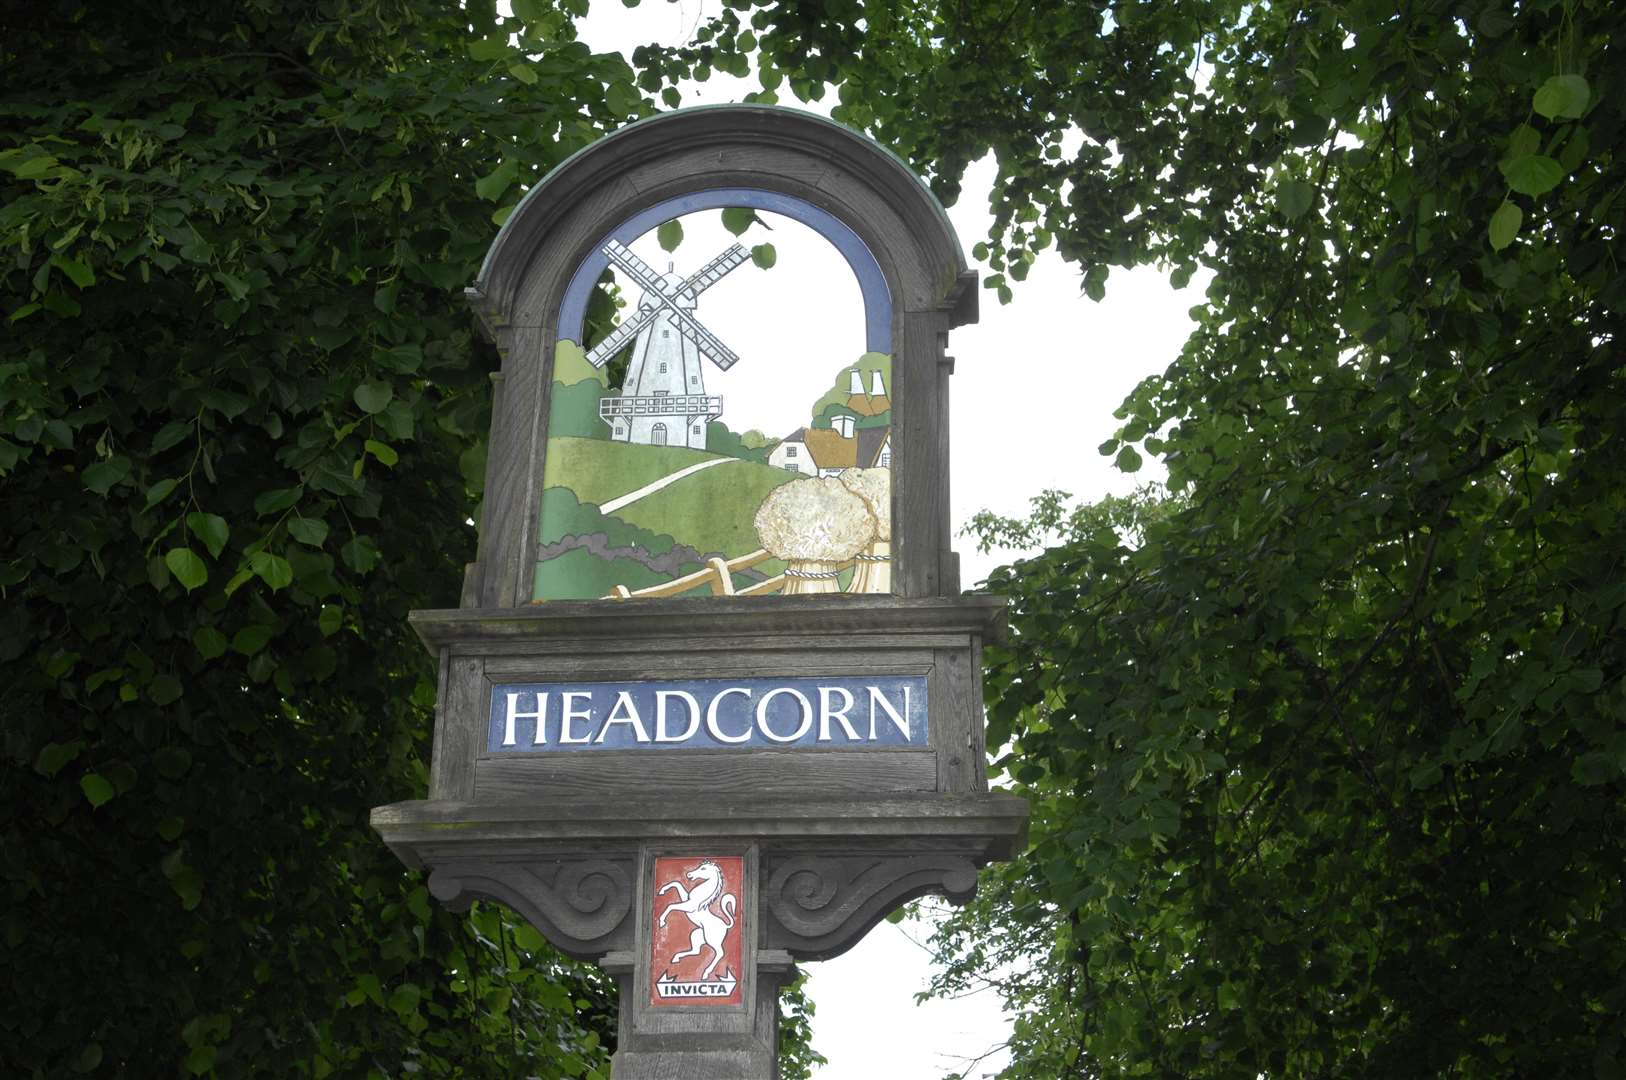 Headcorn will see 220 new homes built